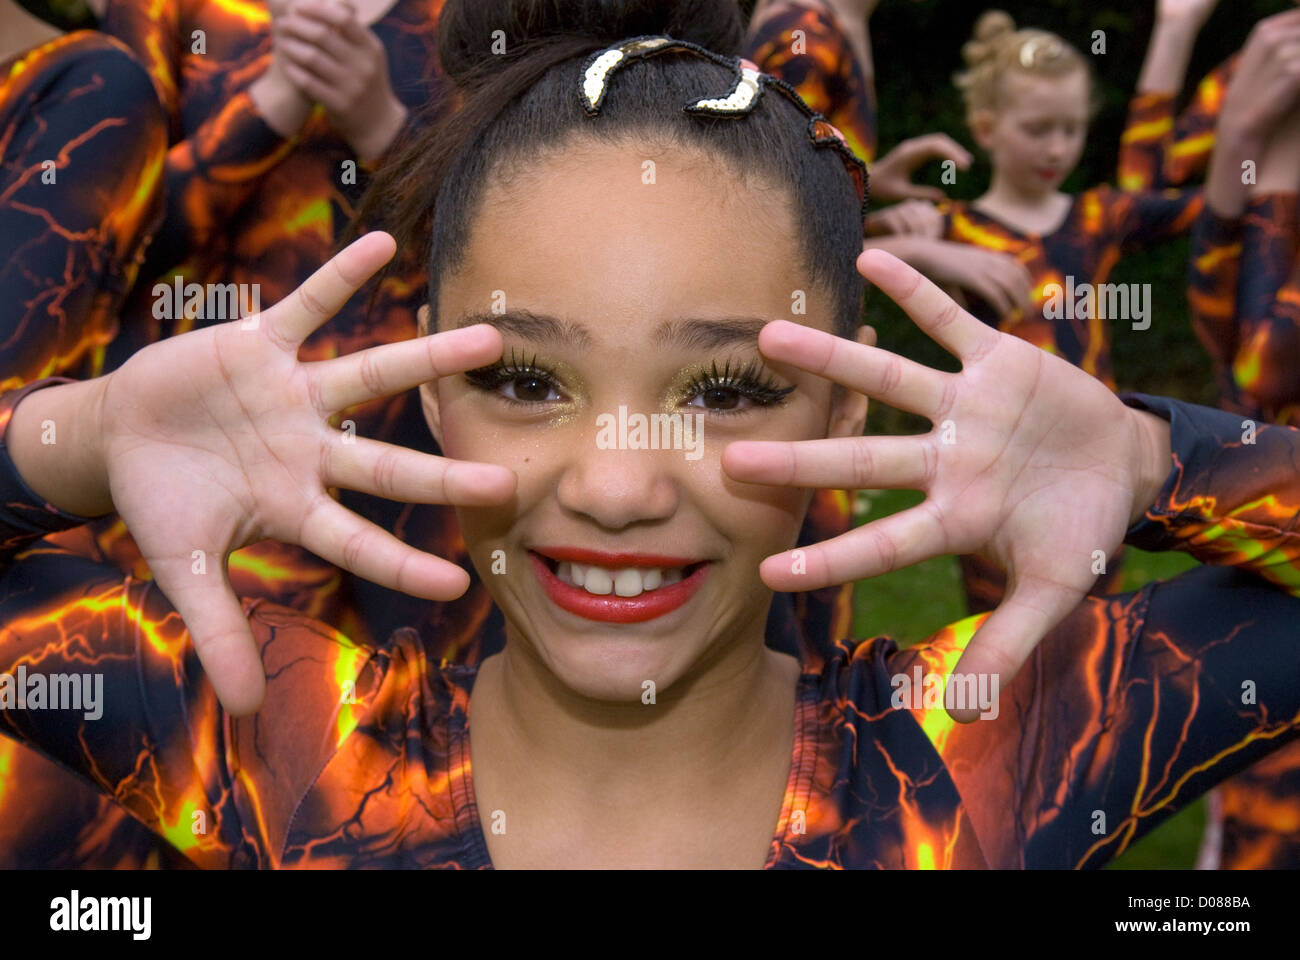 Member of a performing arts group/dance troupe strike a pose, Haslemere, Surrey, UK. Stock Photo